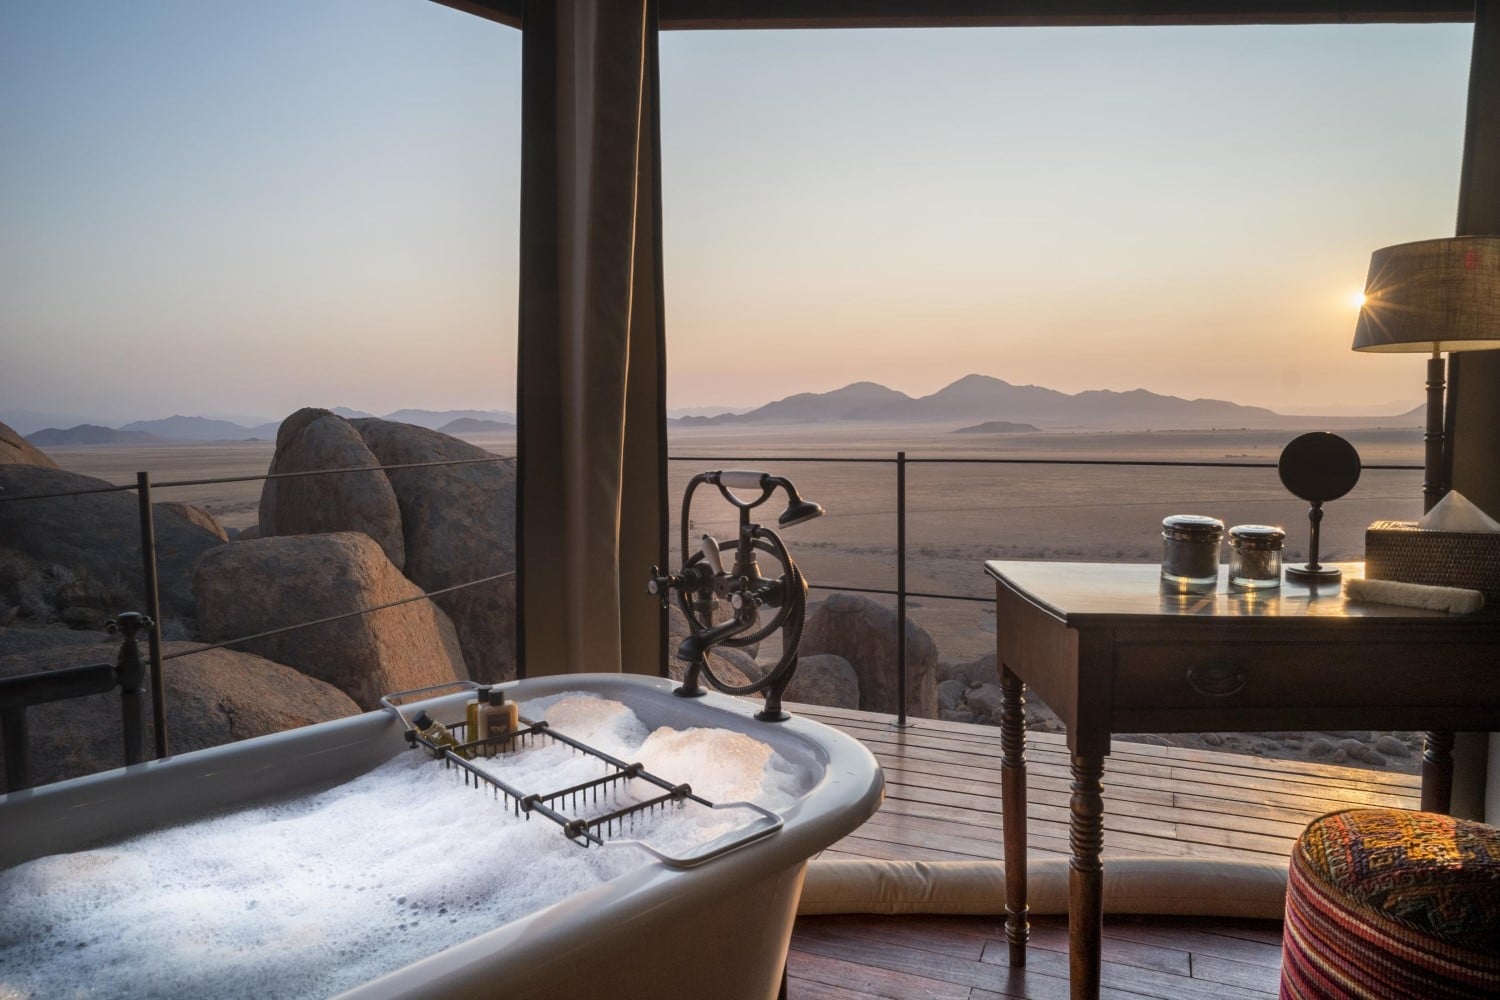 Zannier Hotels Sonop in Namibia, a Mr & Mrs Smith property.